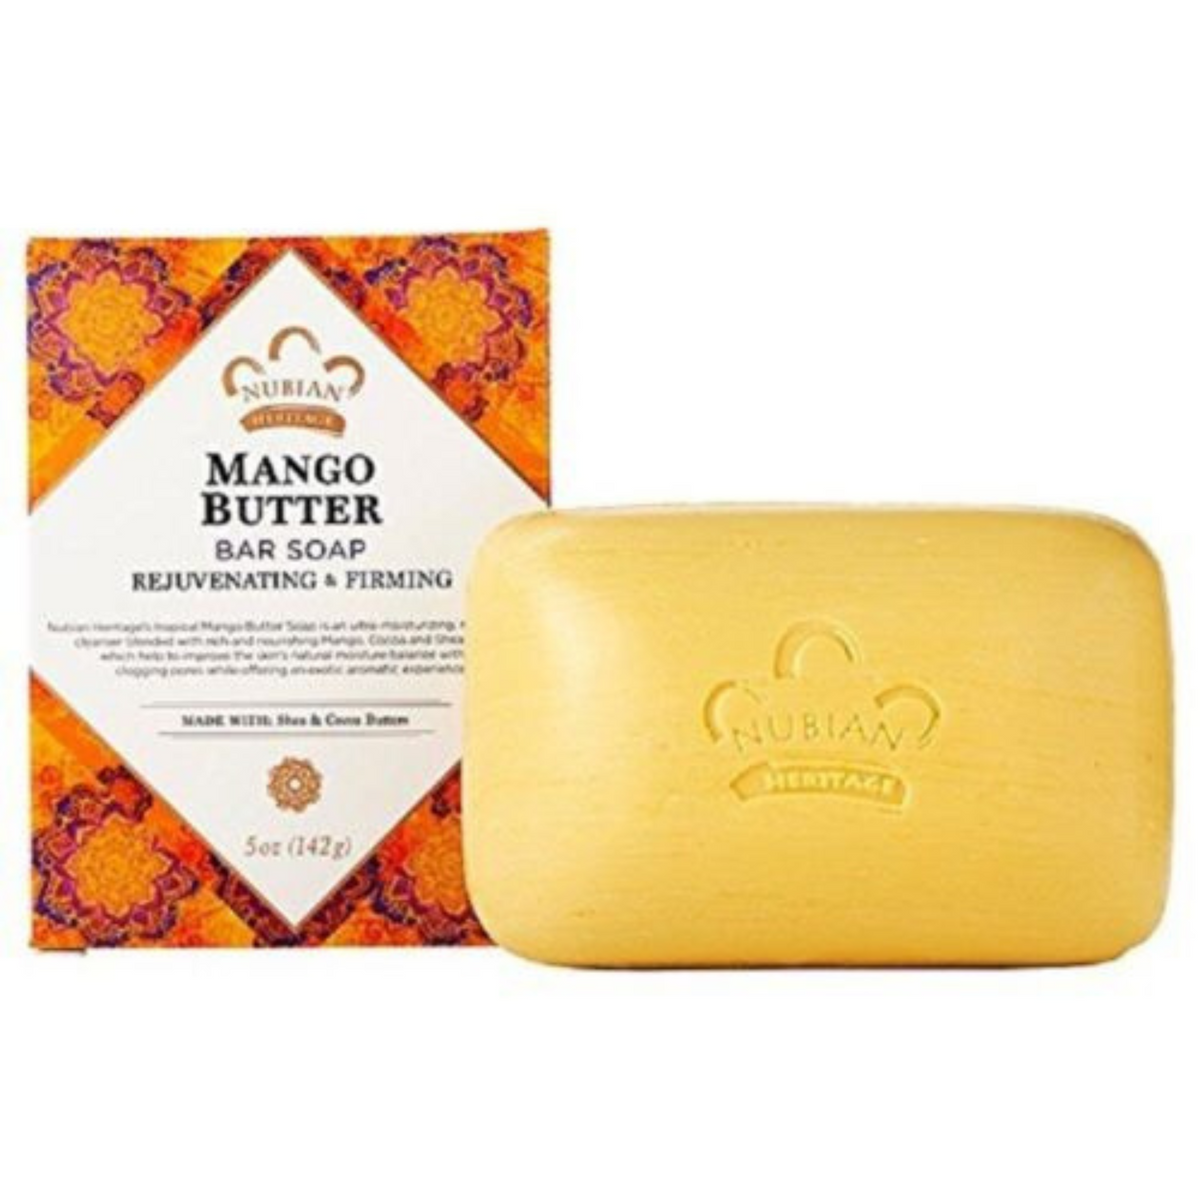 Primary Image of Nubian Heritage Mango Butter Bar Soap